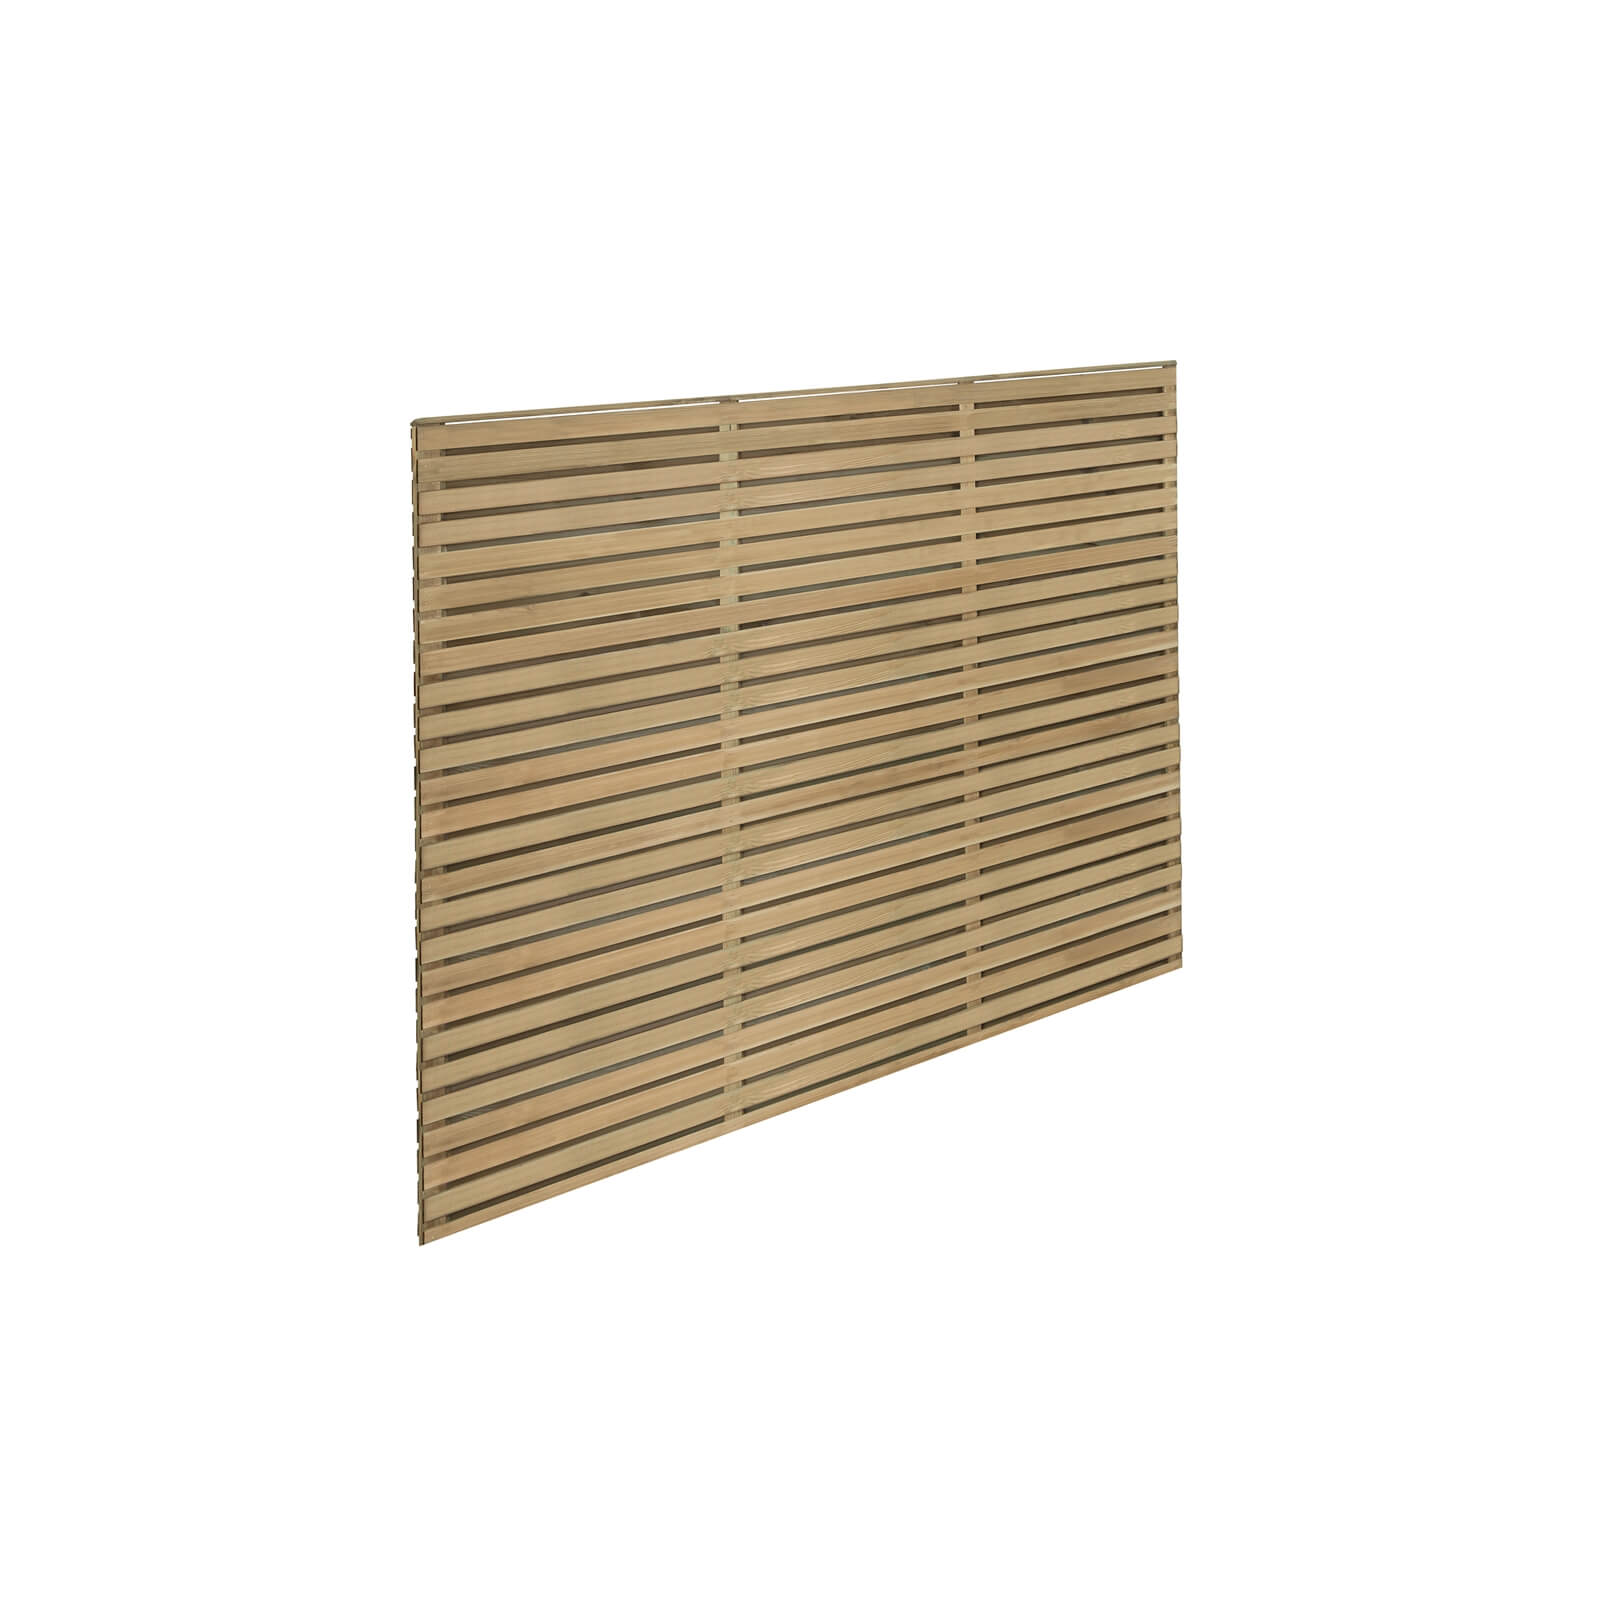 6ft x 5ft (1.8m x 1.5m) Pressure Treated Contemporary Double Slatted Fence Panel - Pack of 4